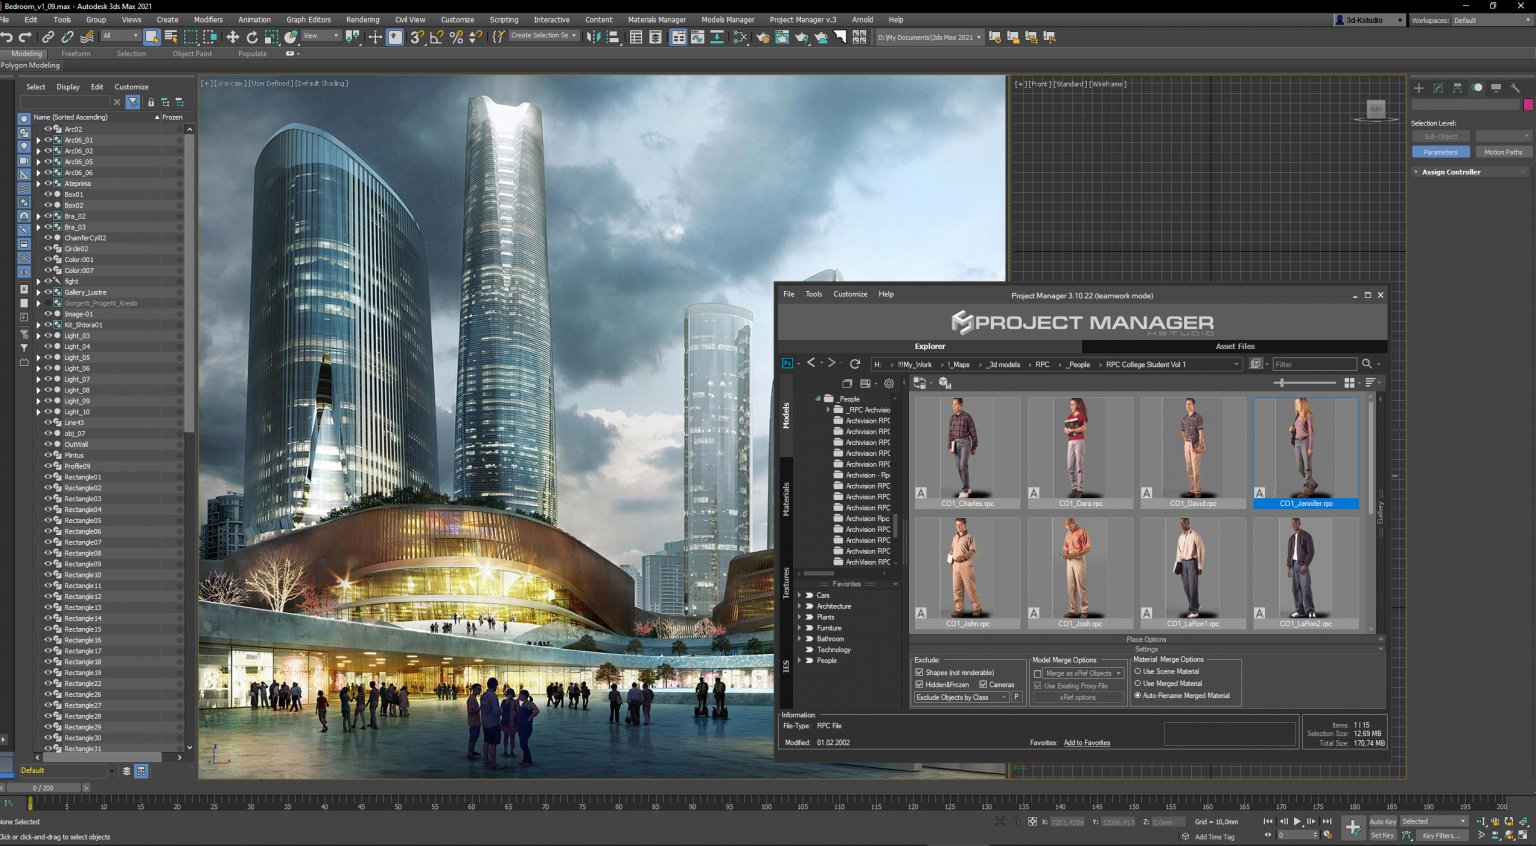 3ds Max with Project Manager plug-in